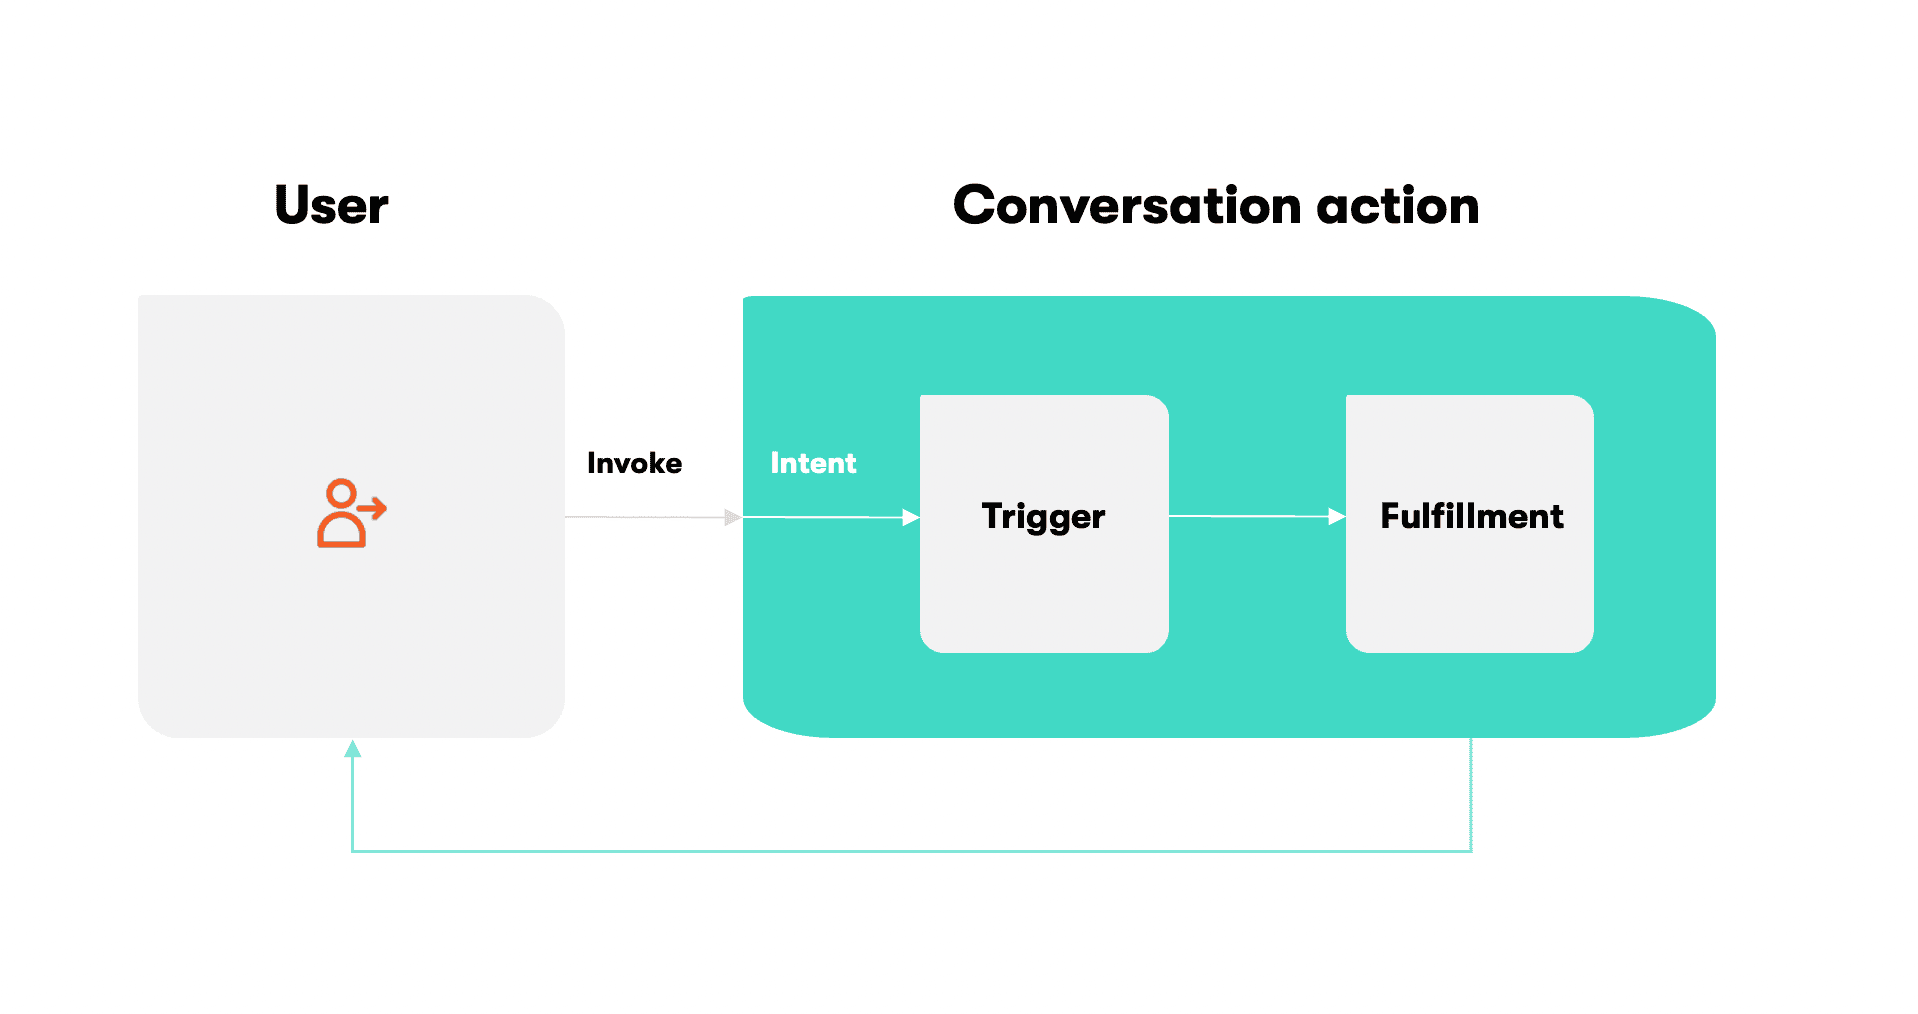 Modeling content for chatbot interfaces differs from web